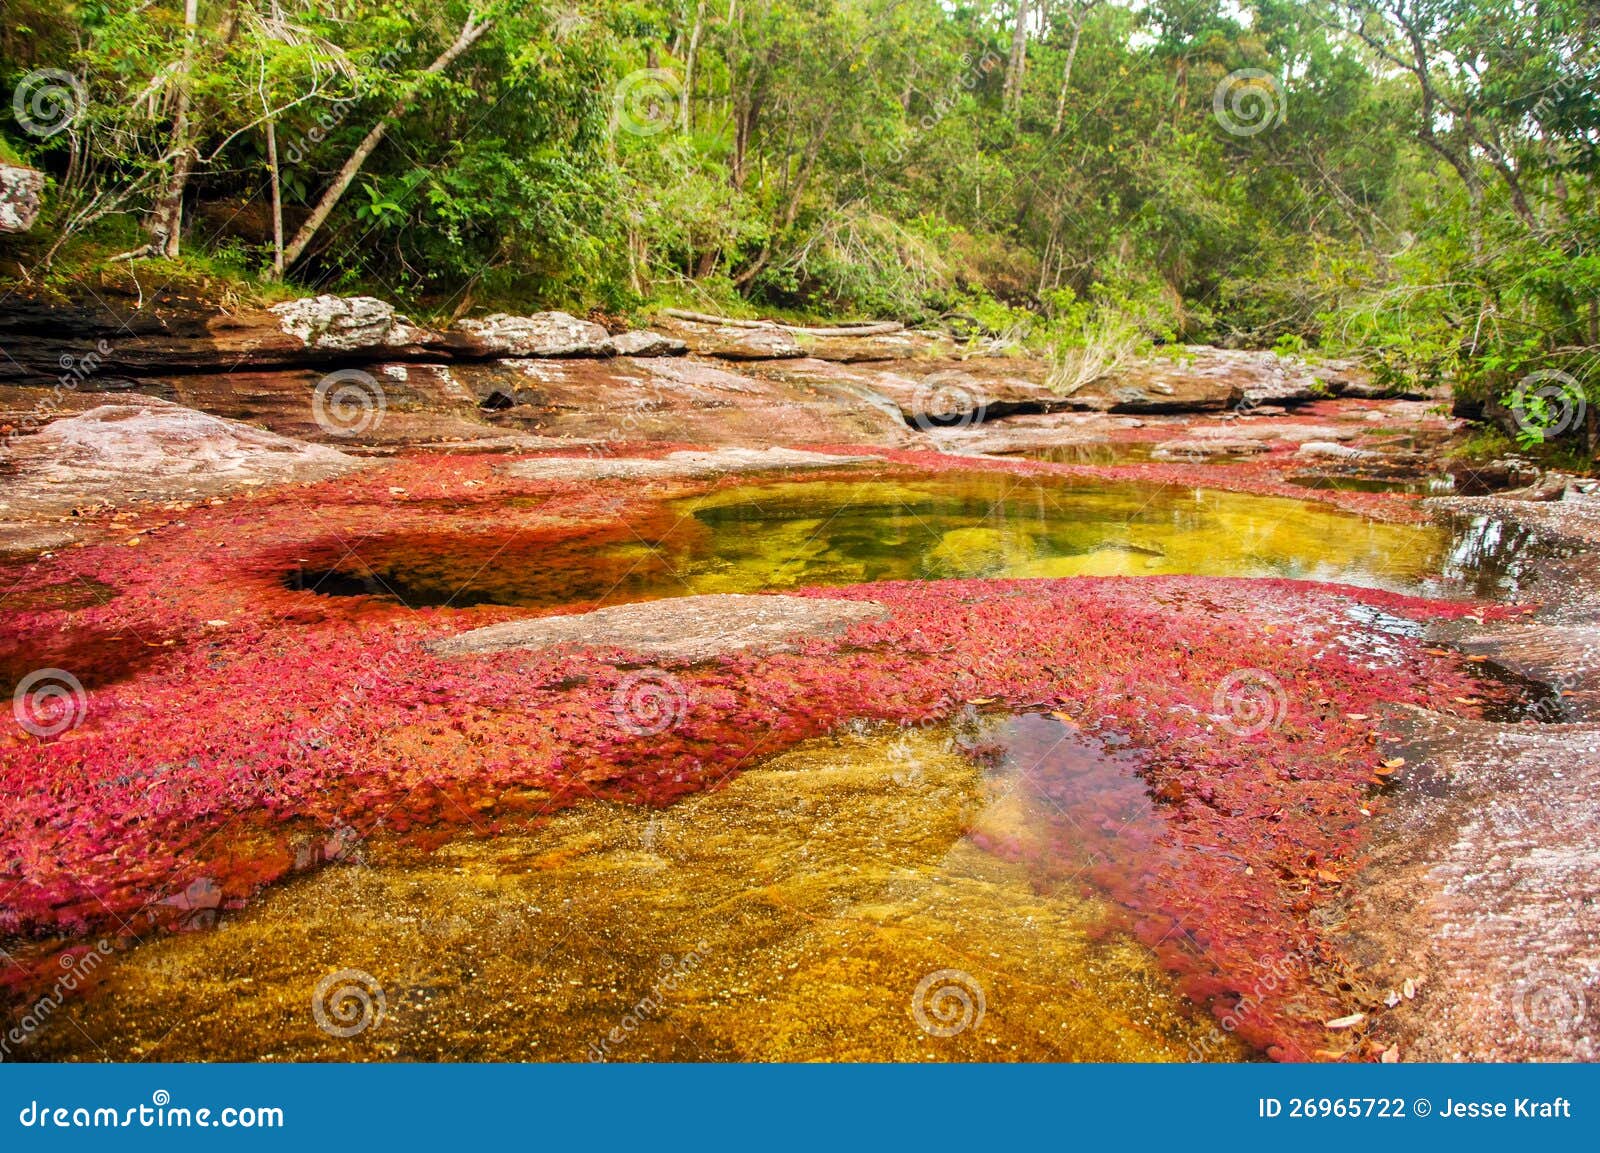 a red and yellow river in colombia